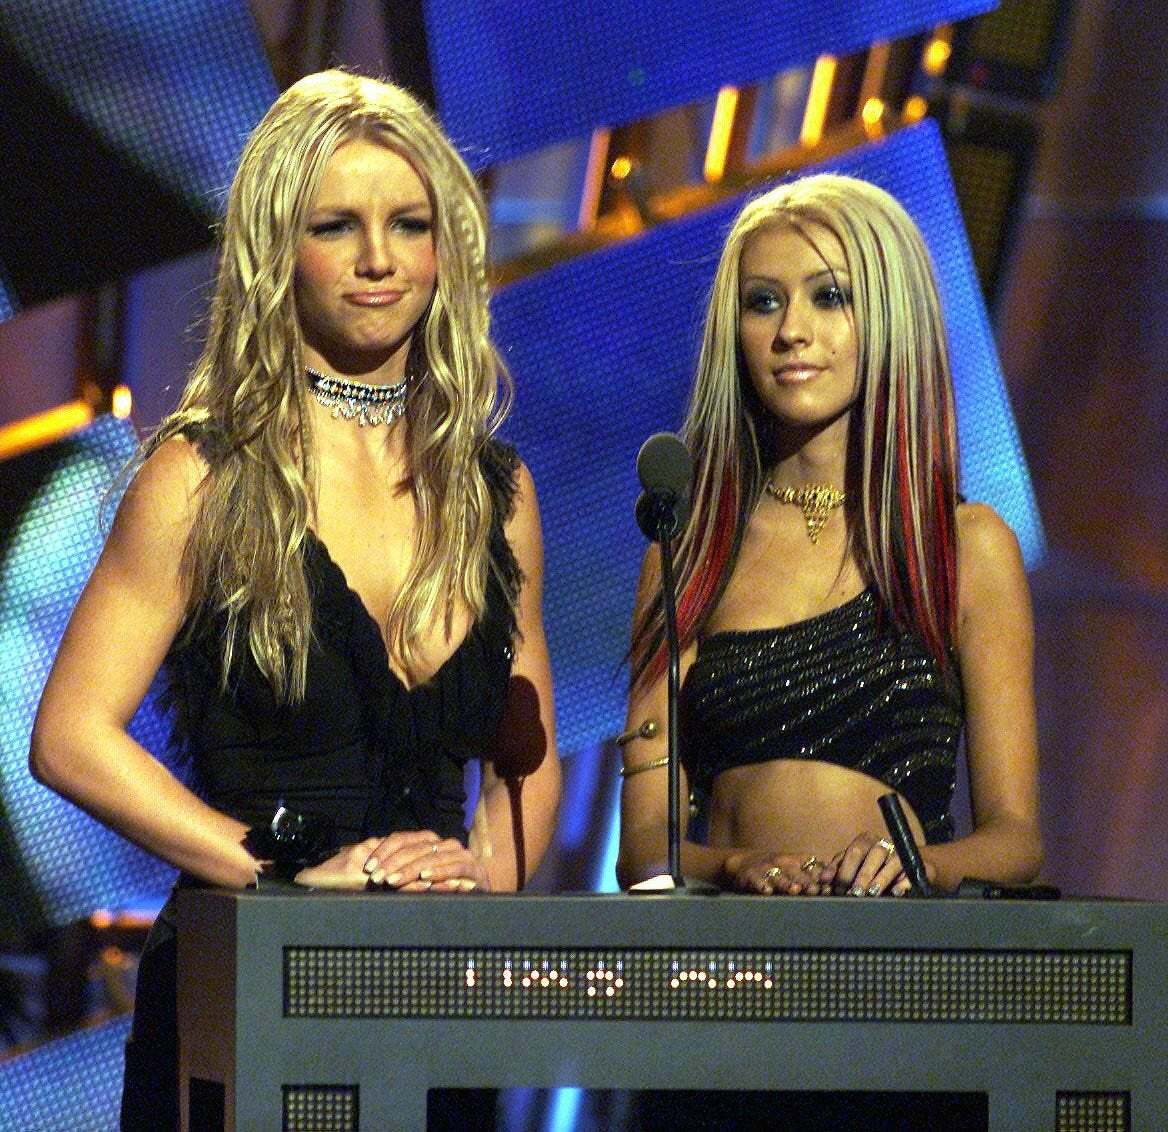 Who would you fuck: Britney Spears or Christina Aguilera?